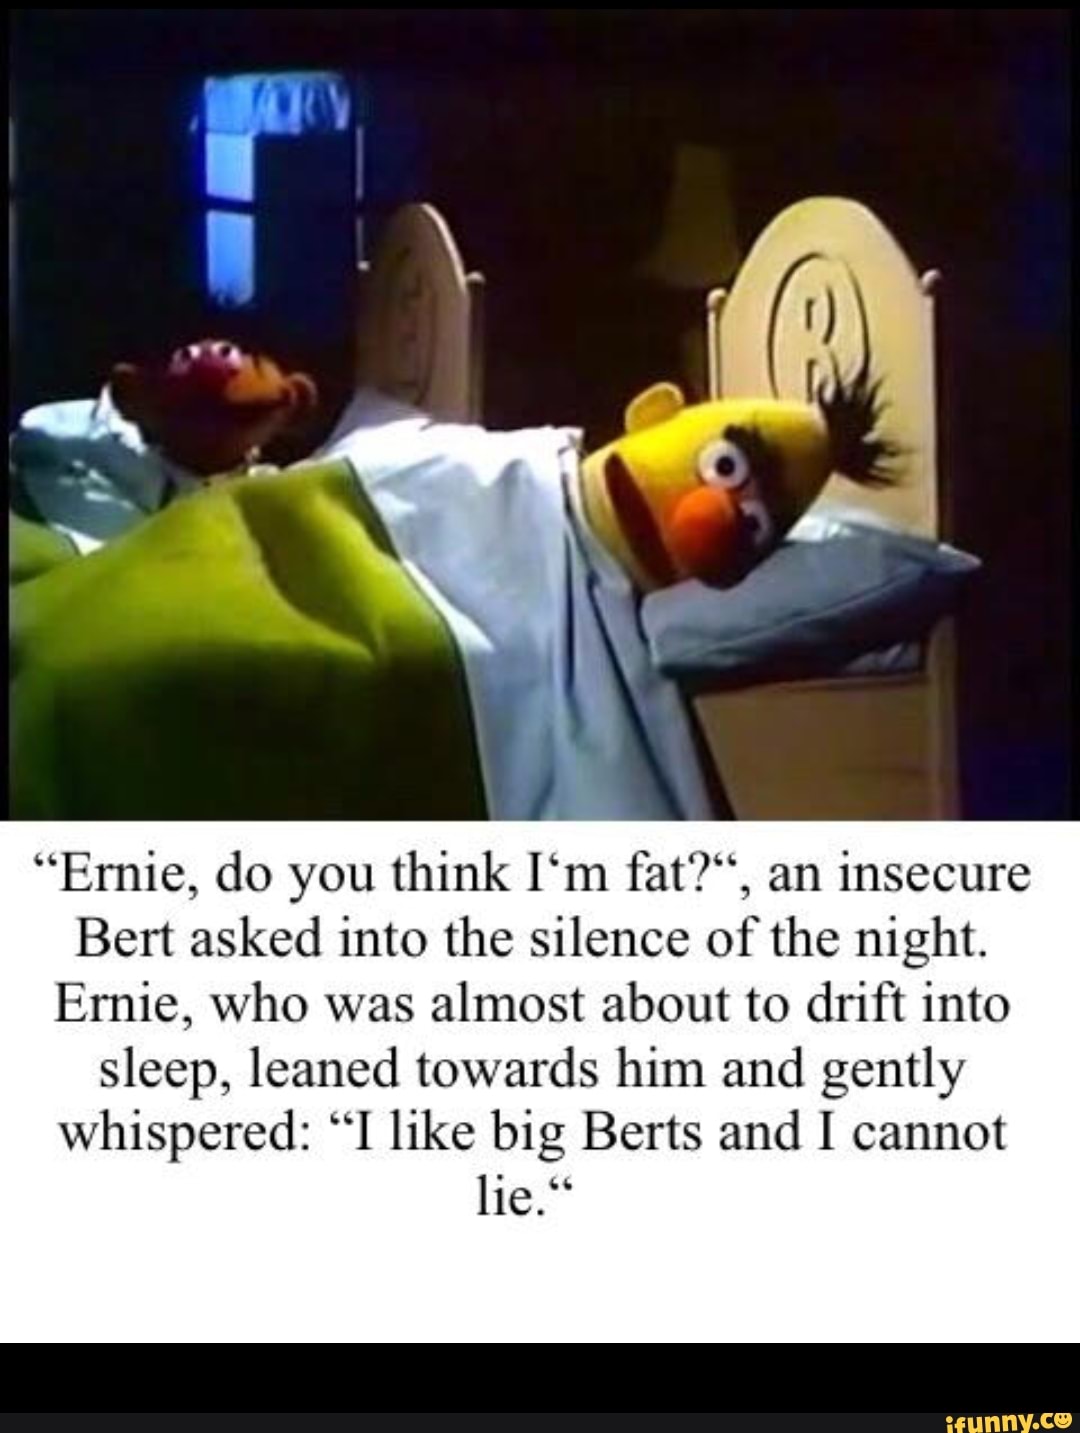 “Ernie, do you think I‘m fat?“, an insecure Bert asked into the silence ...